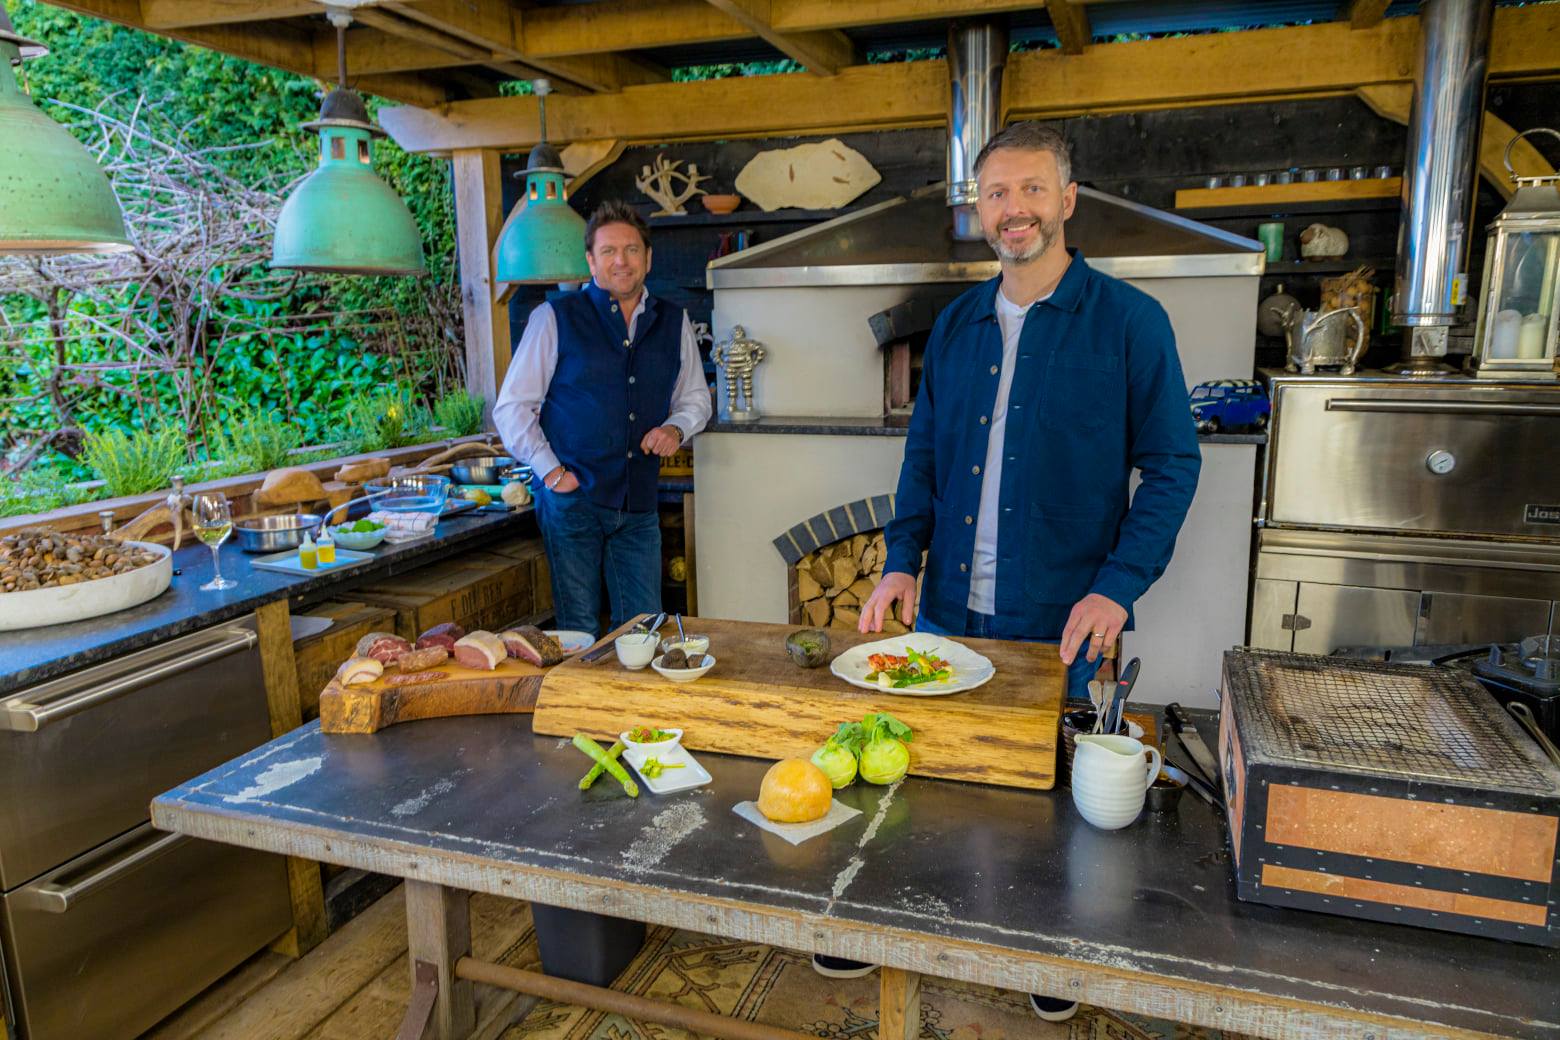 Mark Birchall, the Chef Patron at Moor Hall in Aughton in Lancashire, starred on Saturday Morning with James Martin